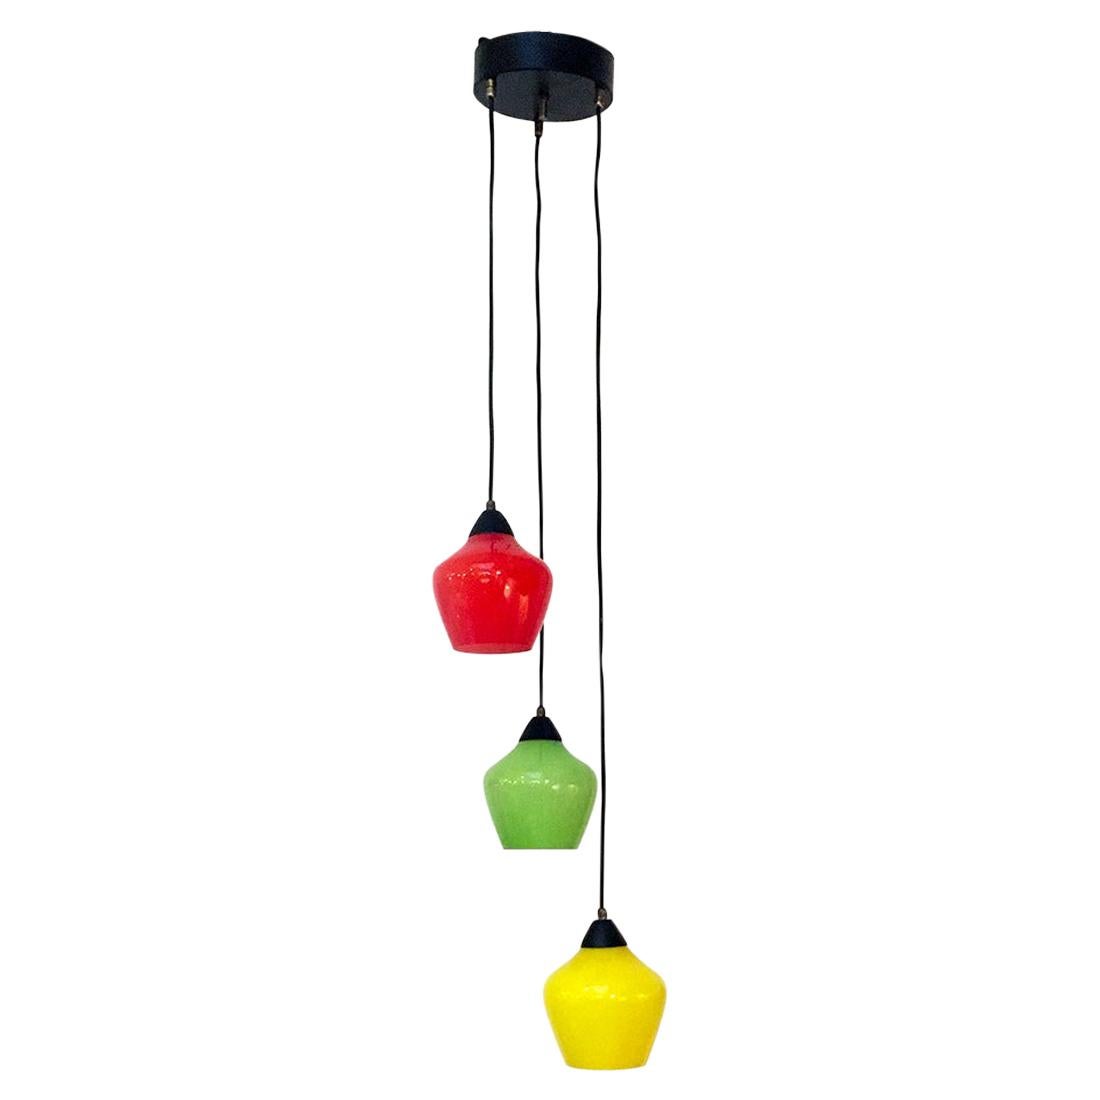 Italian Mid-Century Modern Three-Light Chandelier with Colored Glass, 1950s For Sale